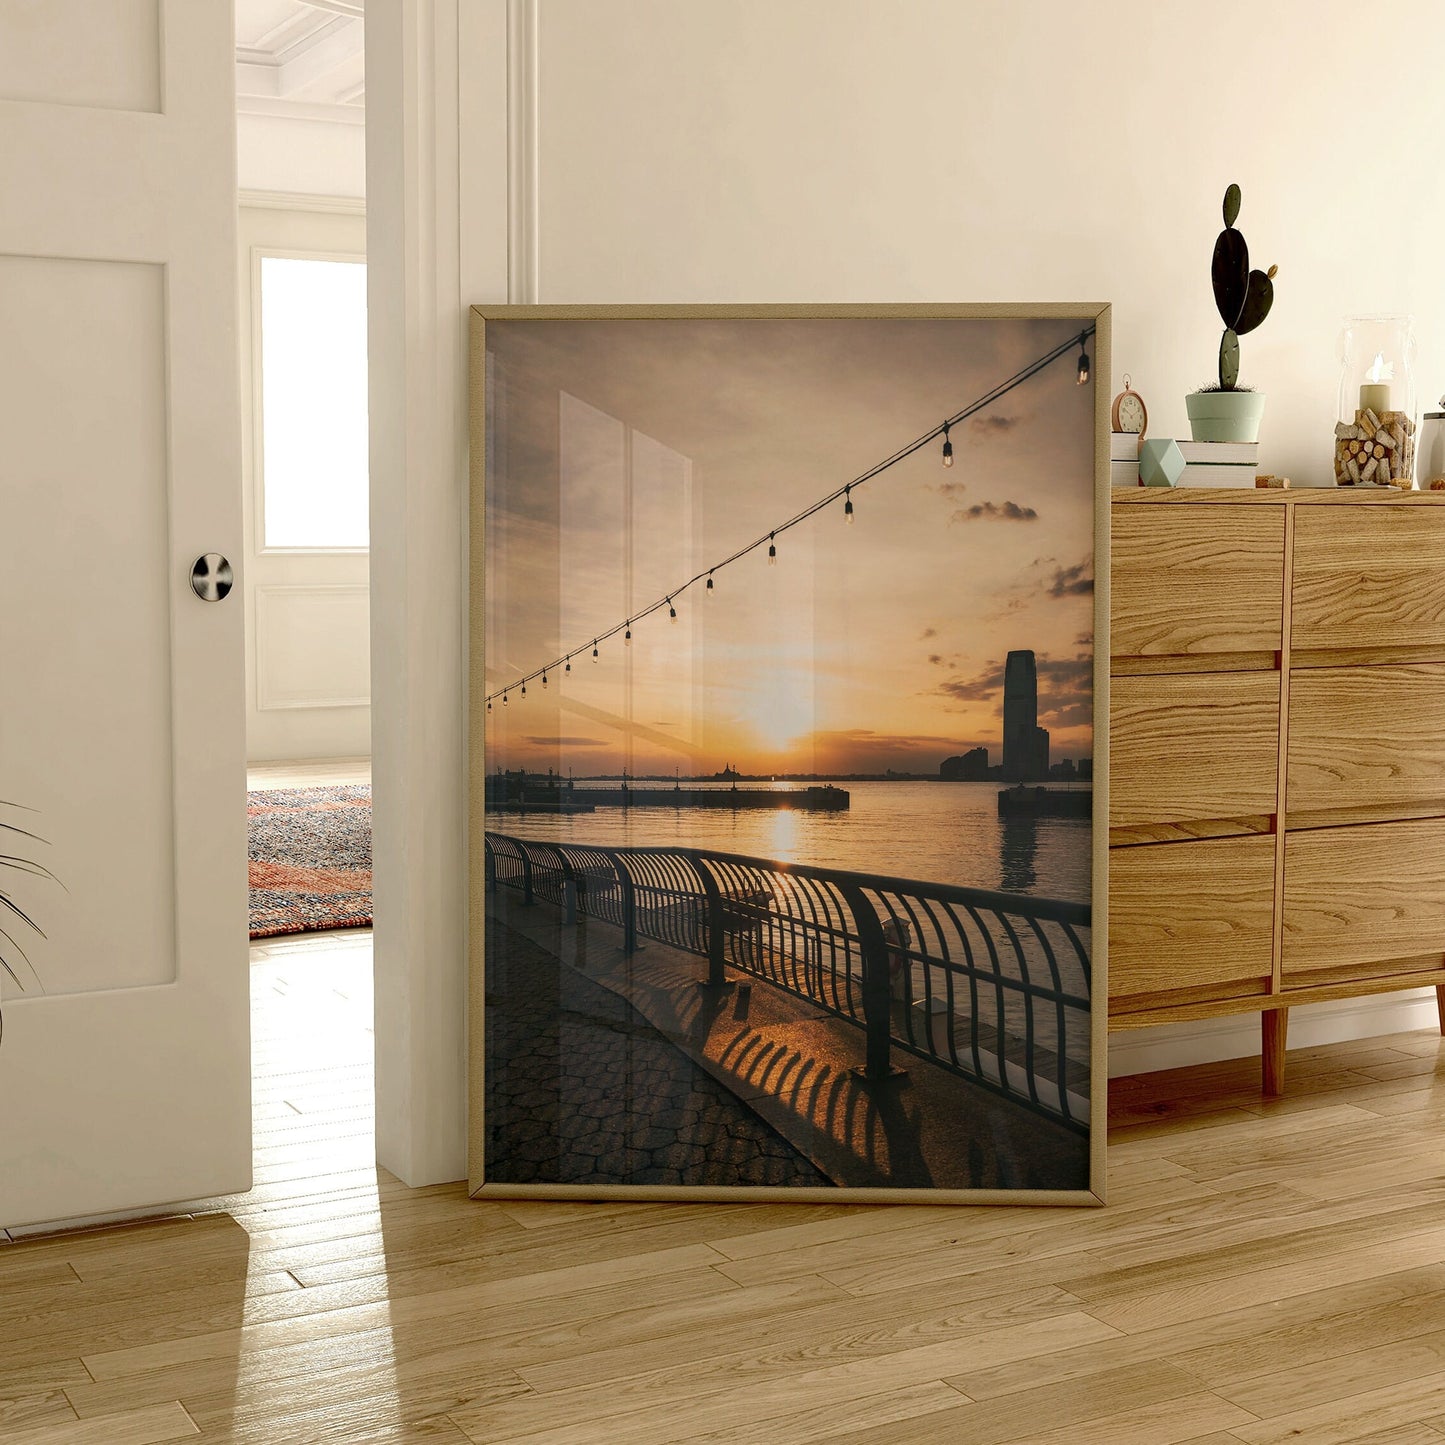 Battery Park Waterfront Sun Setting Photo NYC Wall Art Sunset Poster New York City Print Photography Museum-quality Photo Framed Photo Large